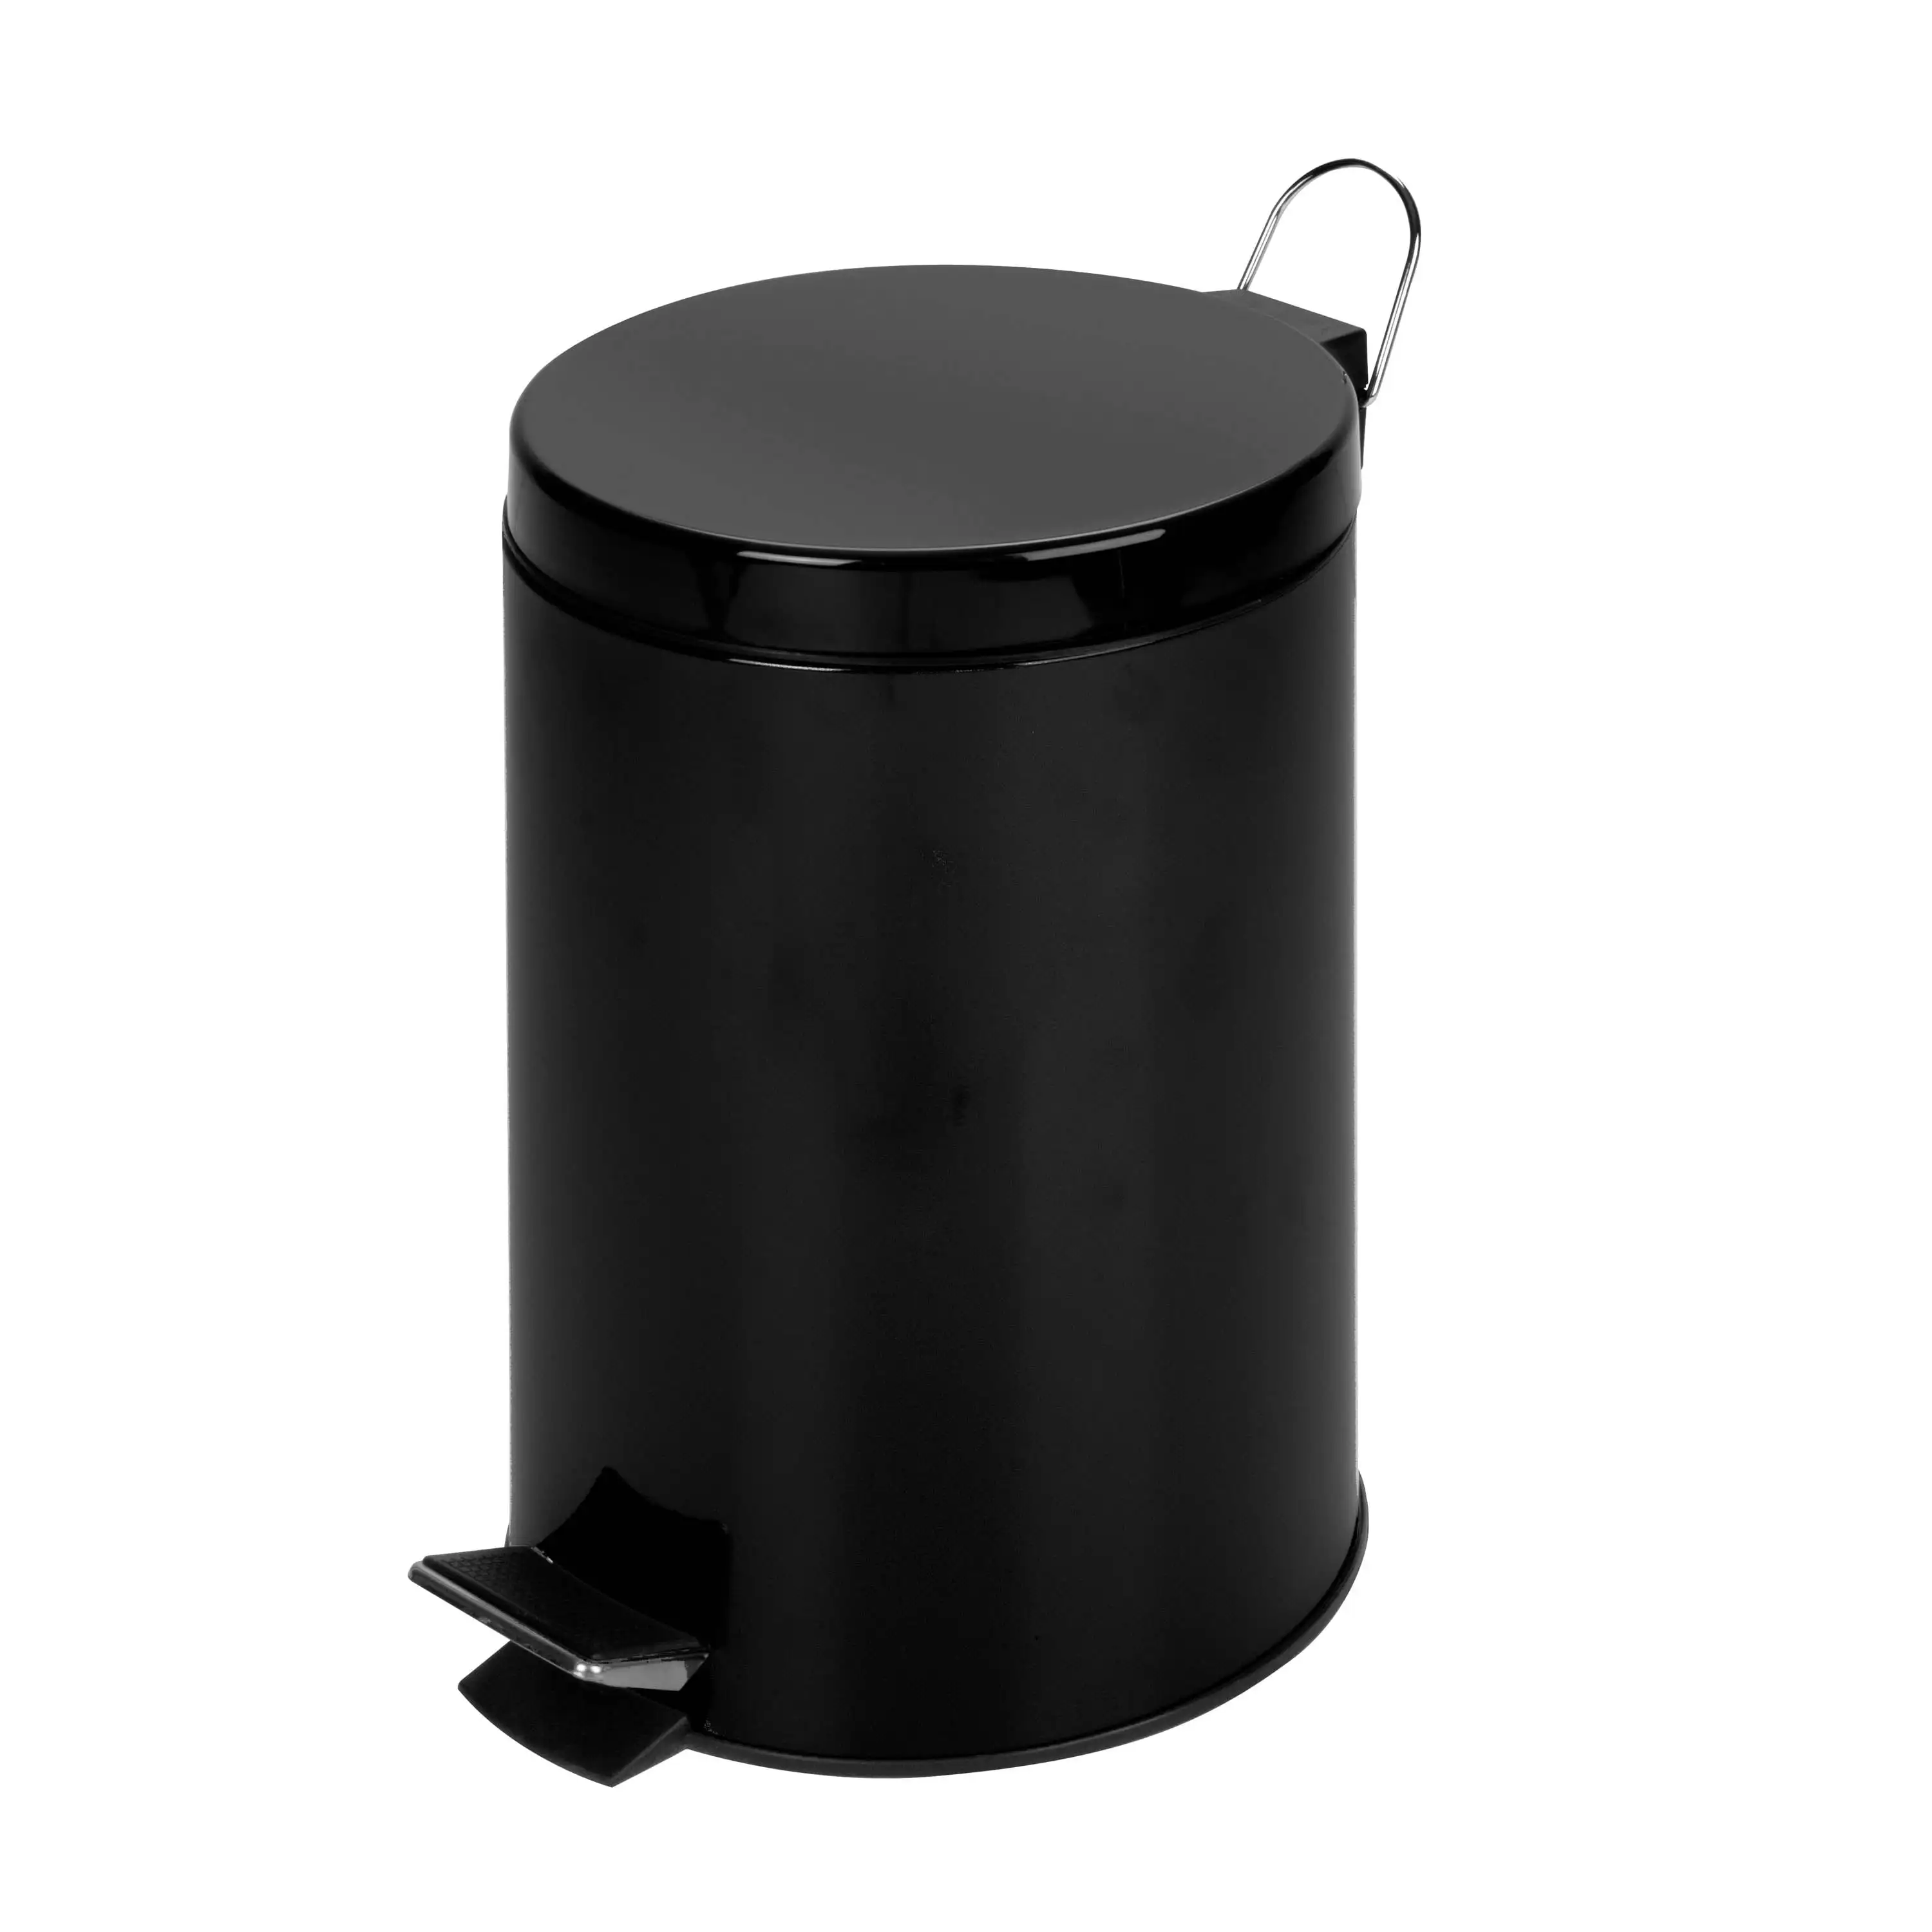 

Honey Can Do 3.17 Gallon Indoor Round Steel Step Trash Can, Black